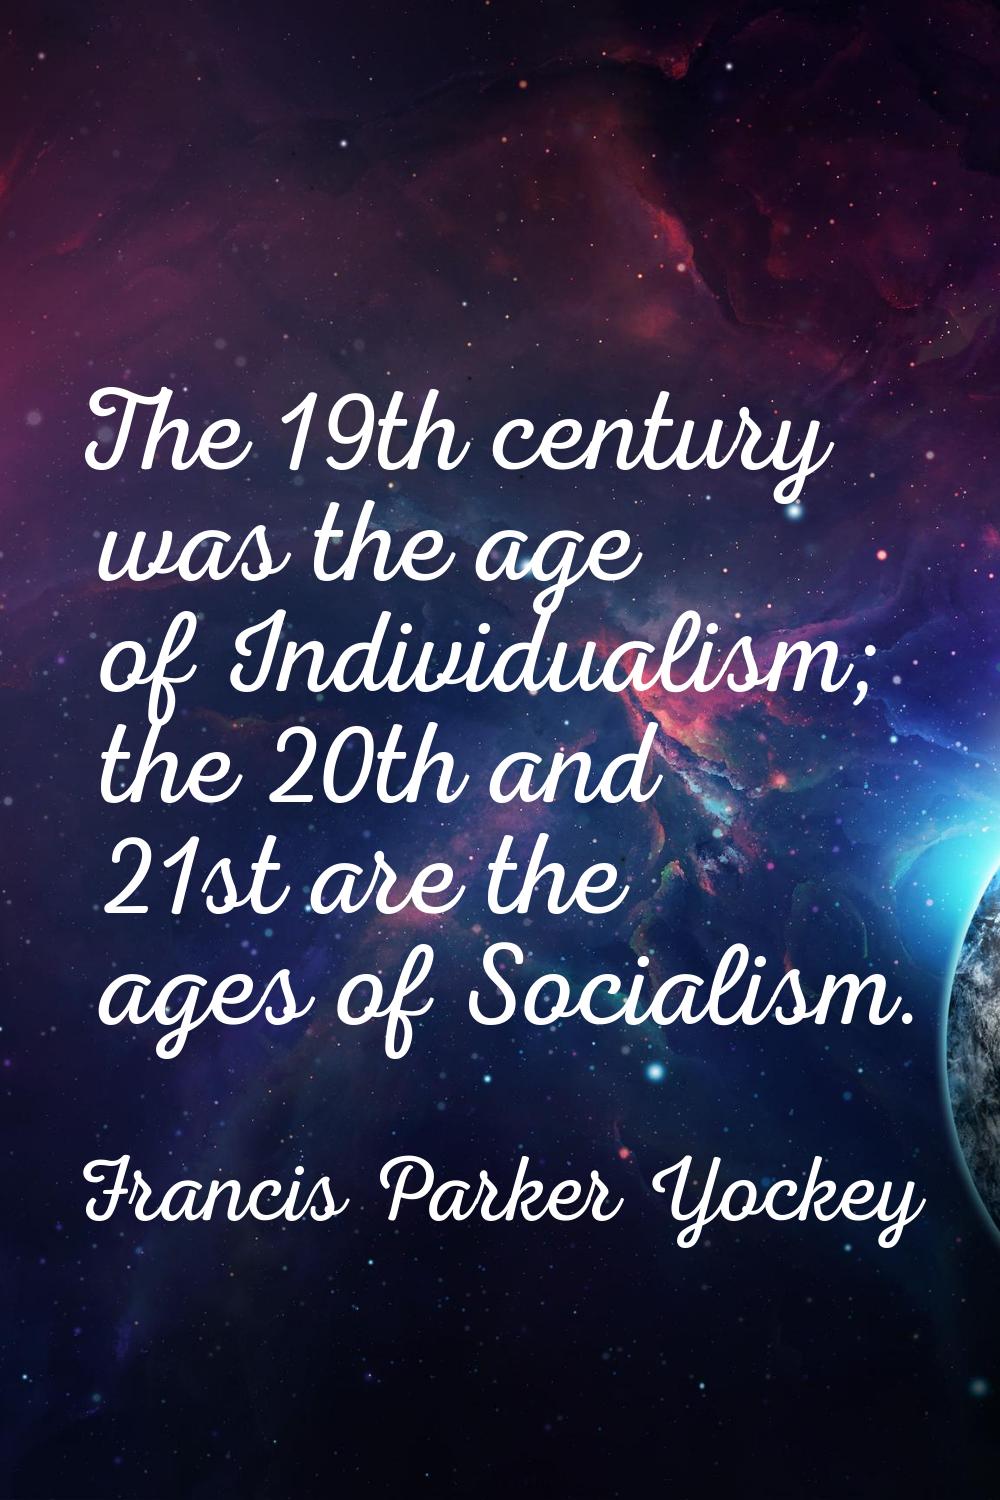 The 19th century was the age of Individualism; the 20th and 21st are the ages of Socialism.